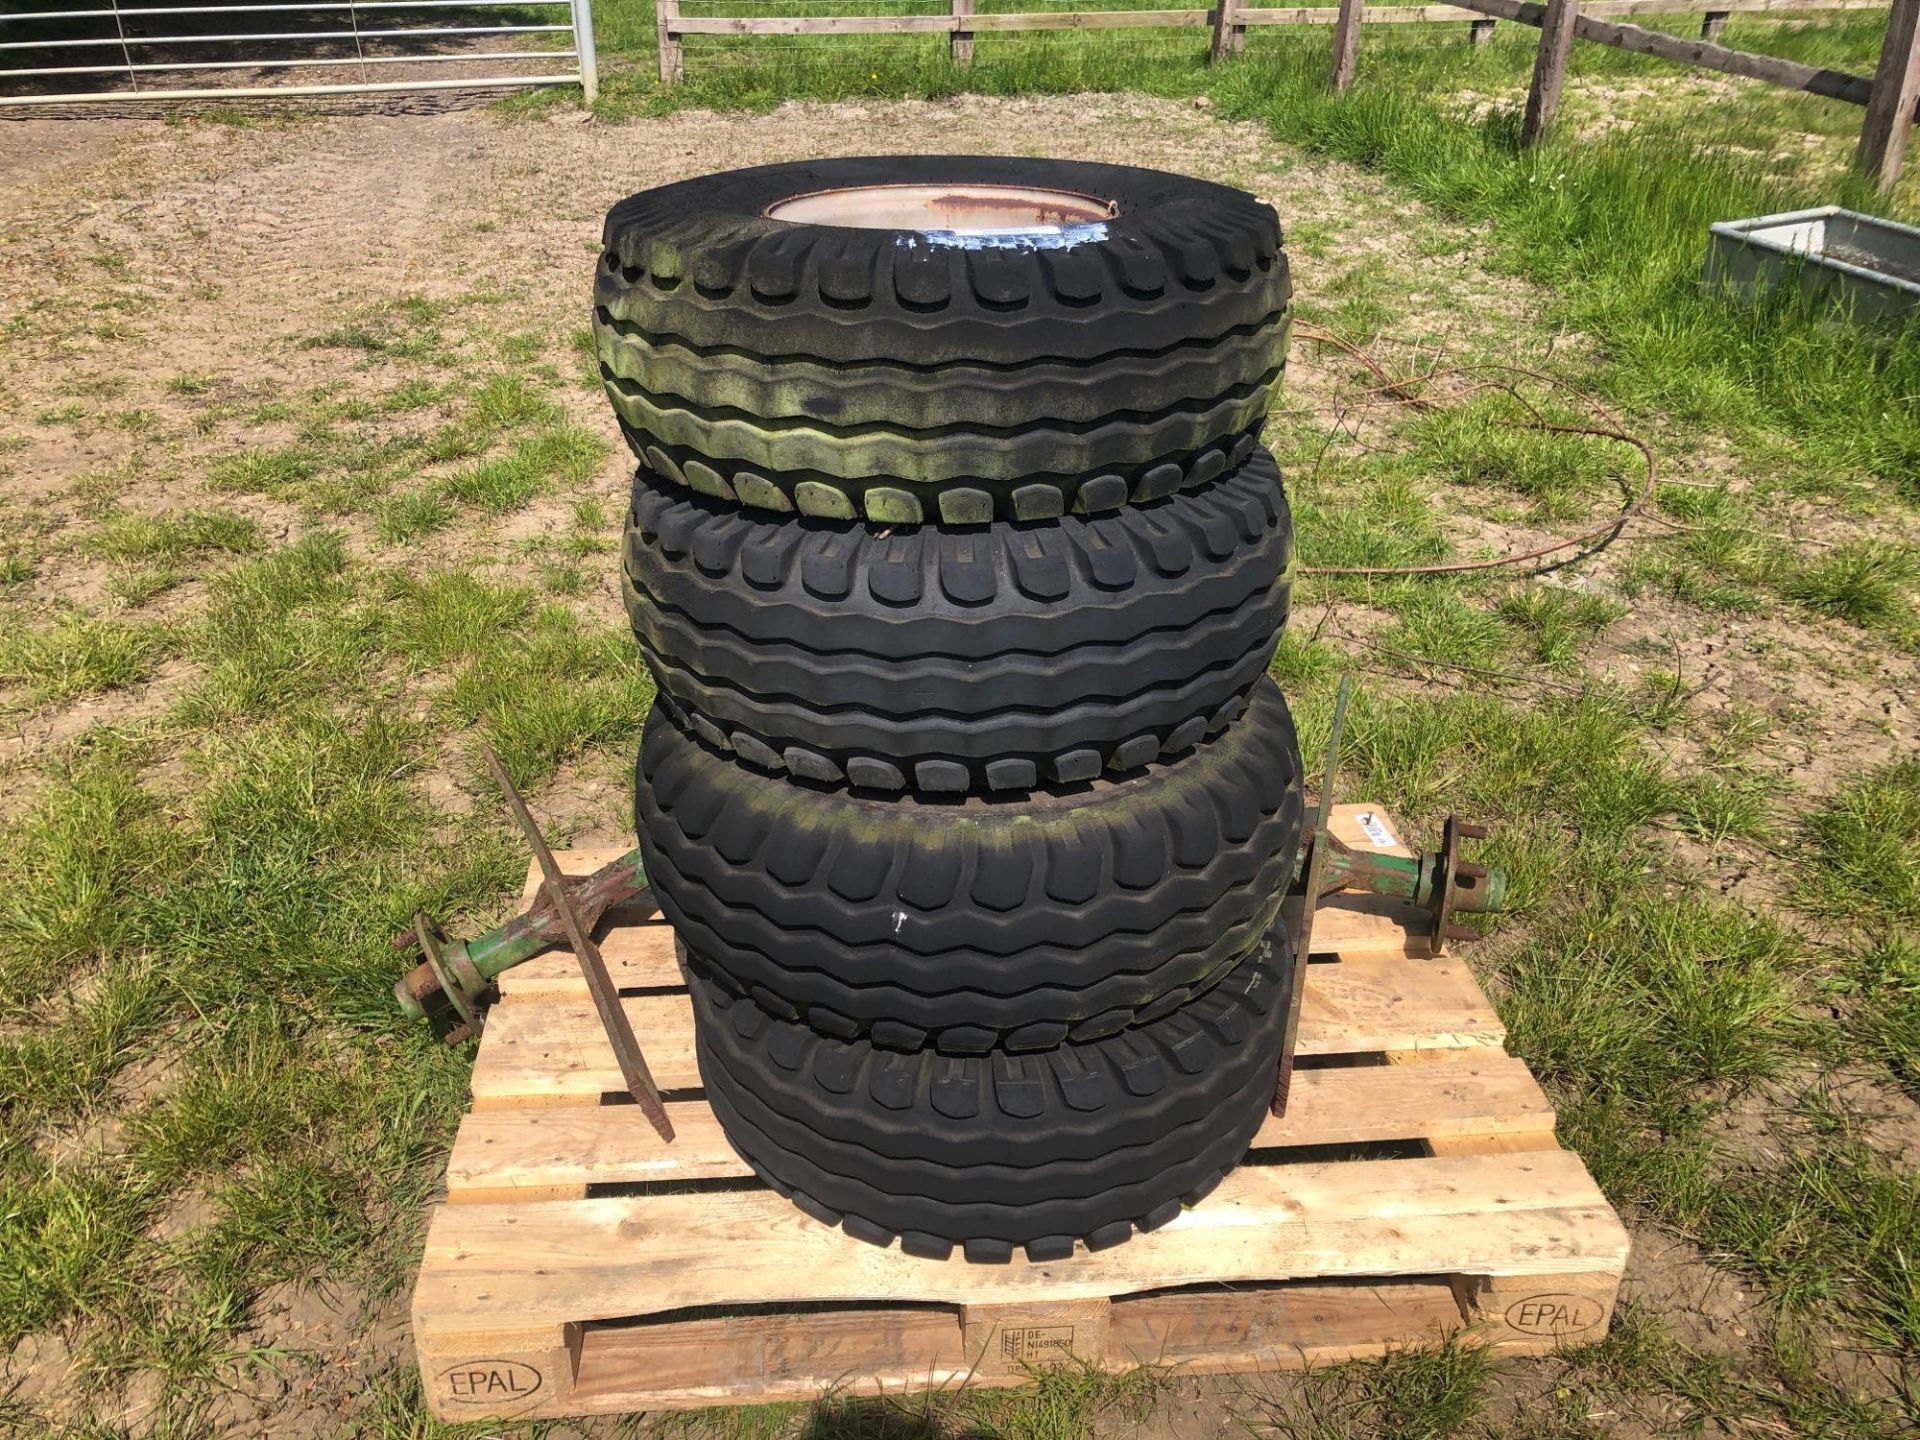 4No 10.0/80-12 wheels and tyres (5 stud) with axles